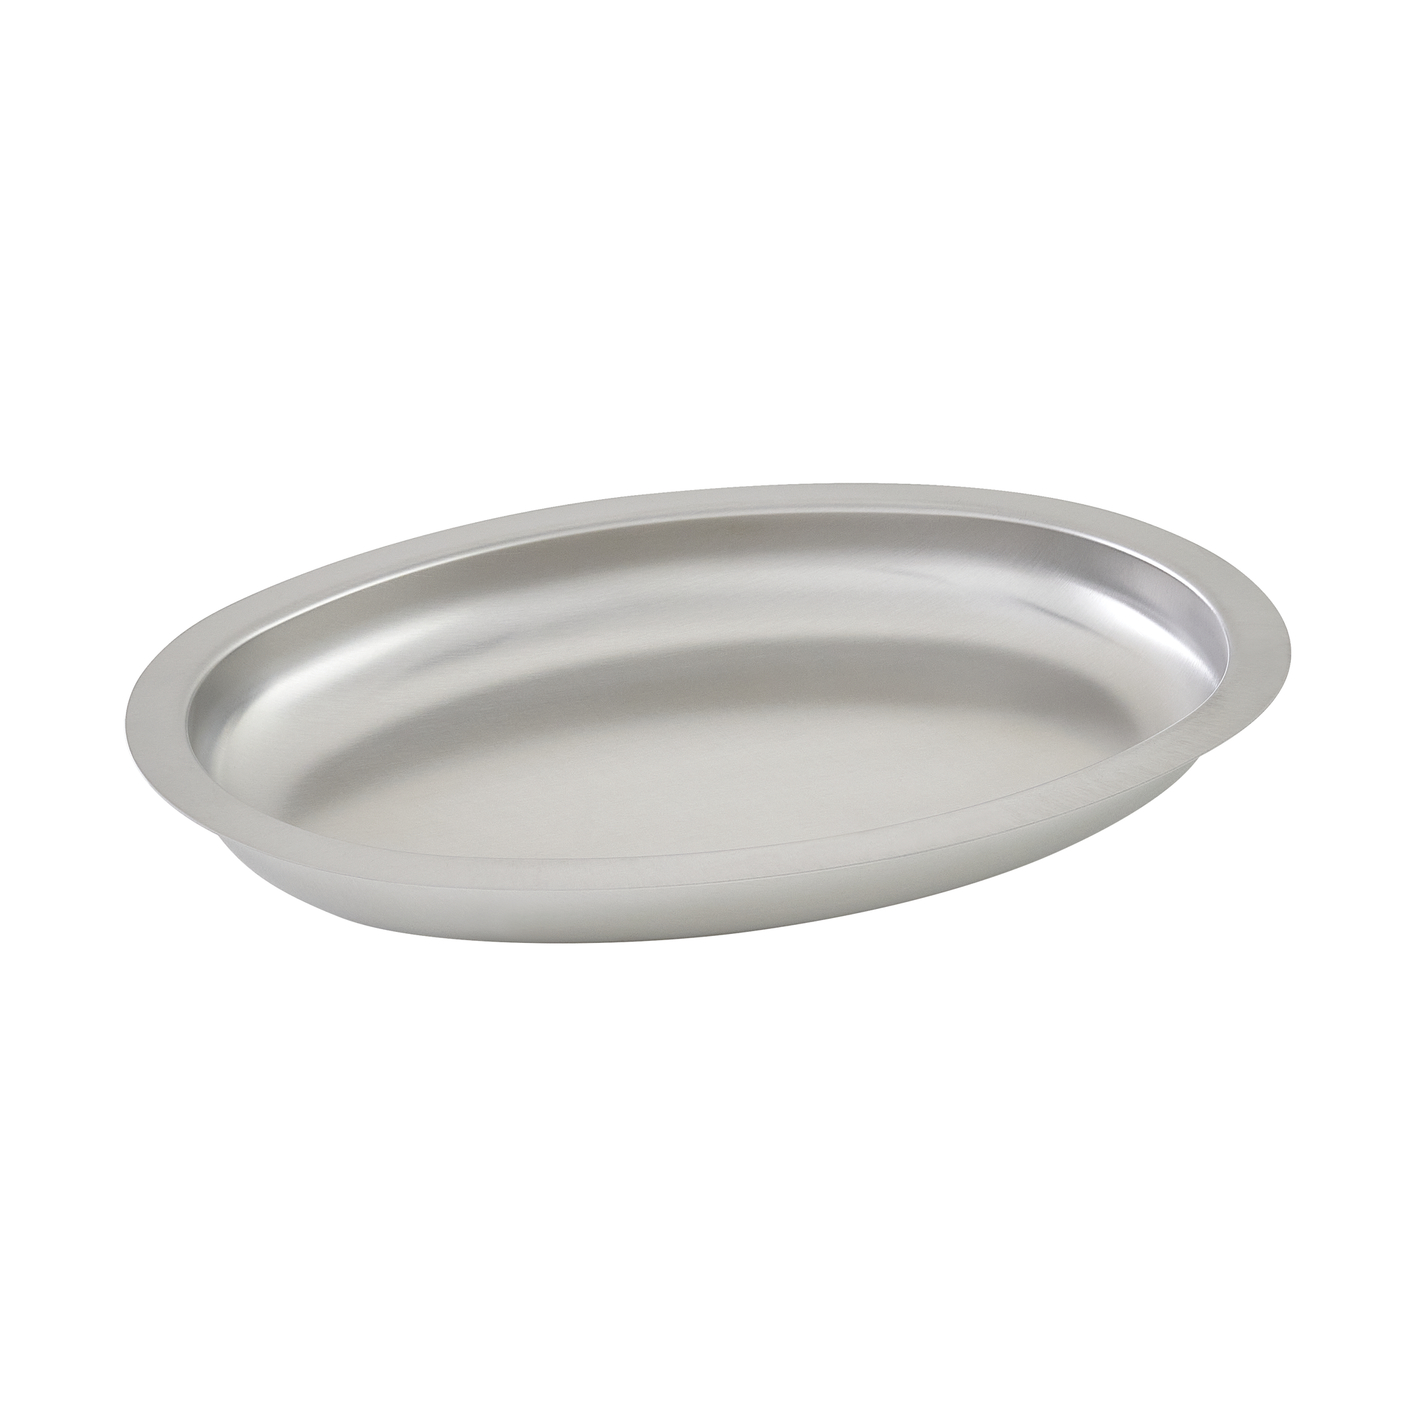 Lifetime Cookware Oval Baking Dish